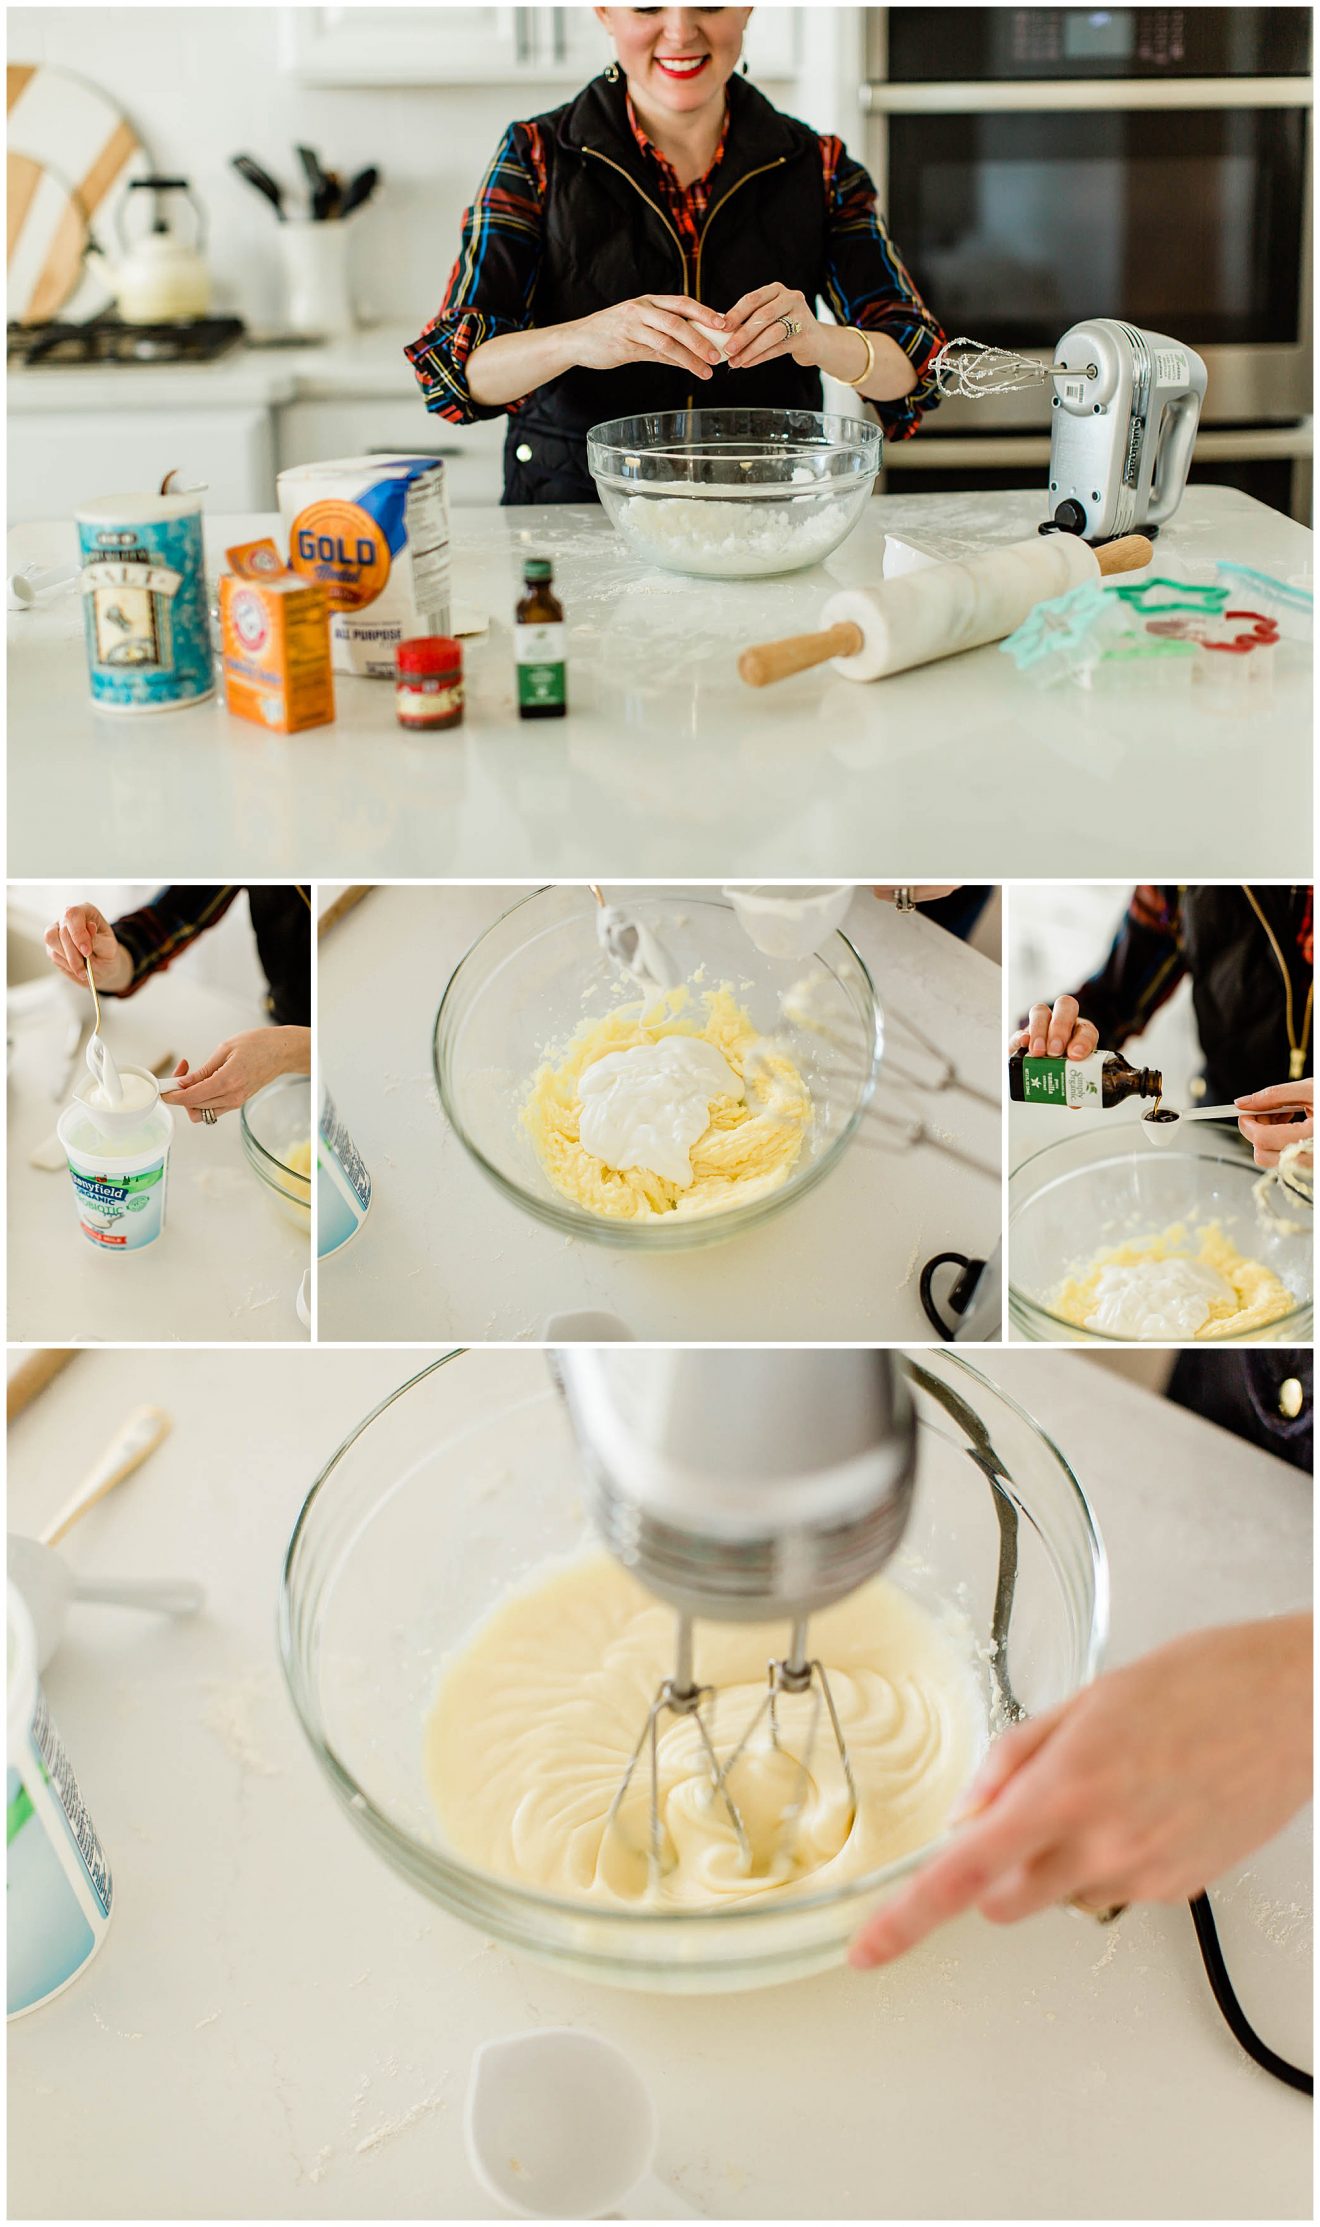 Adding ingredients to a clear bowl to make Christmas sugar cookies